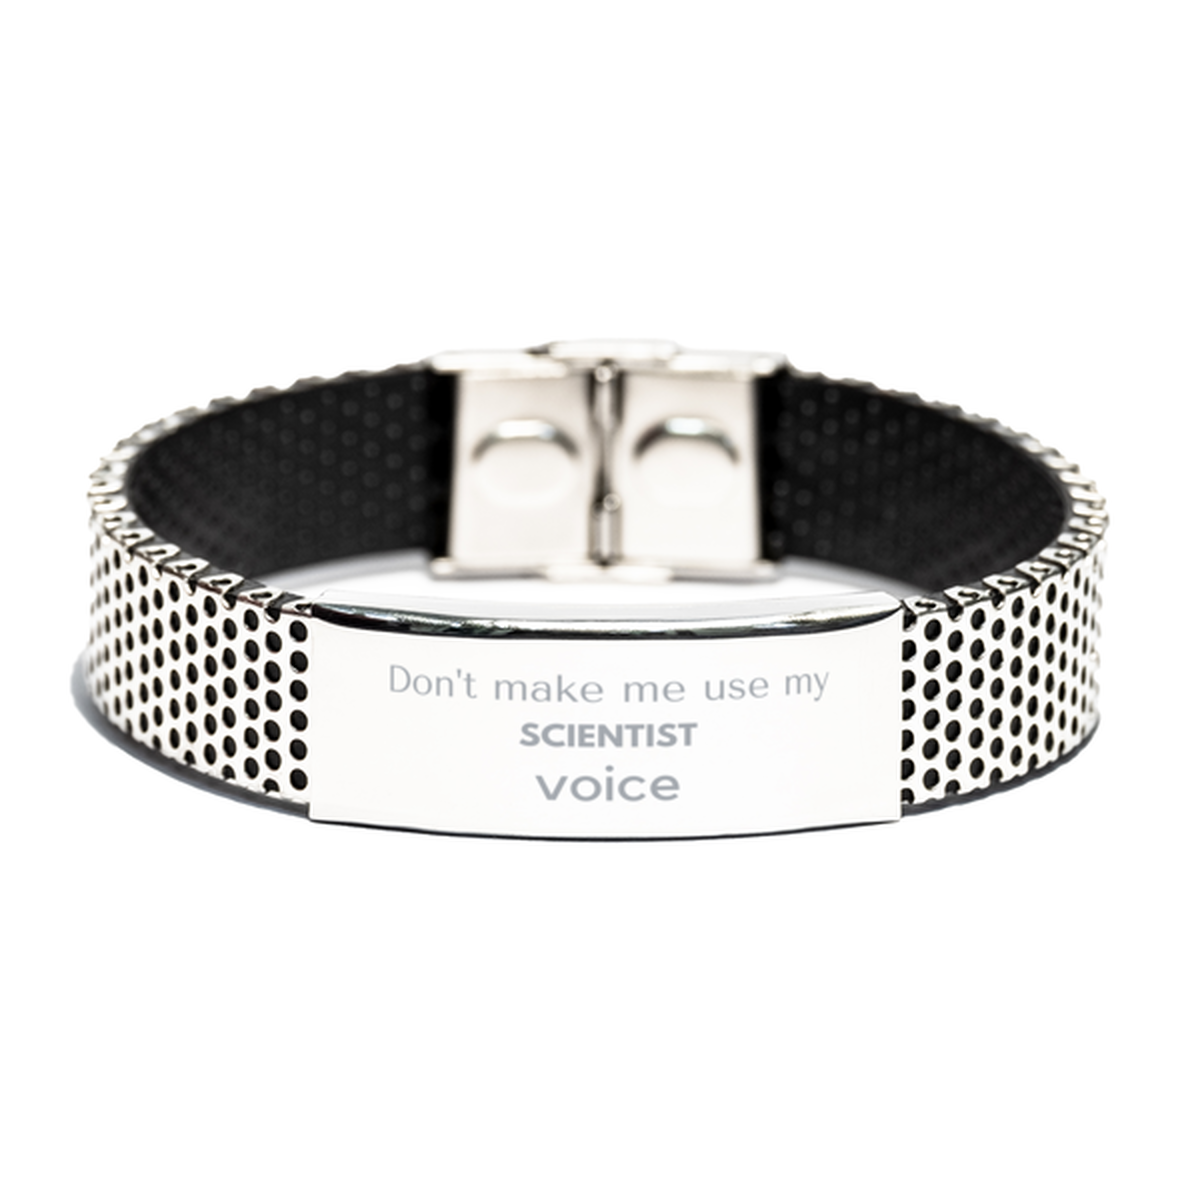 Don't make me use my Scientist voice, Sarcasm Scientist Gifts, Christmas Scientist Stainless Steel Bracelet Birthday Unique Gifts For Scientist Coworkers, Men, Women, Colleague, Friends